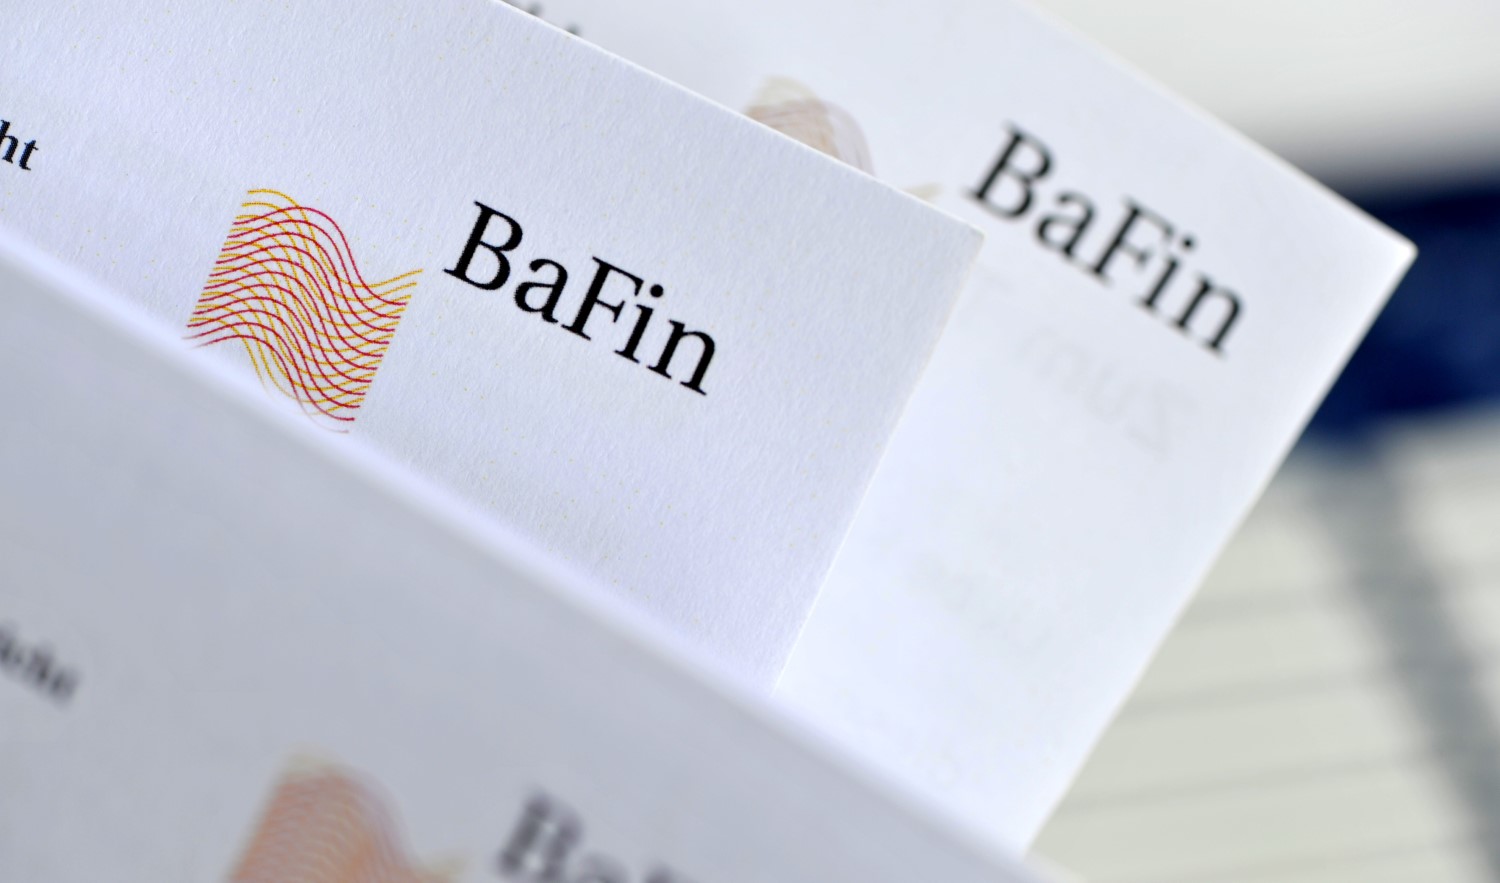 Germany’s-bafin-clarifies-licensing-process-for-foreign-crypto-custodians